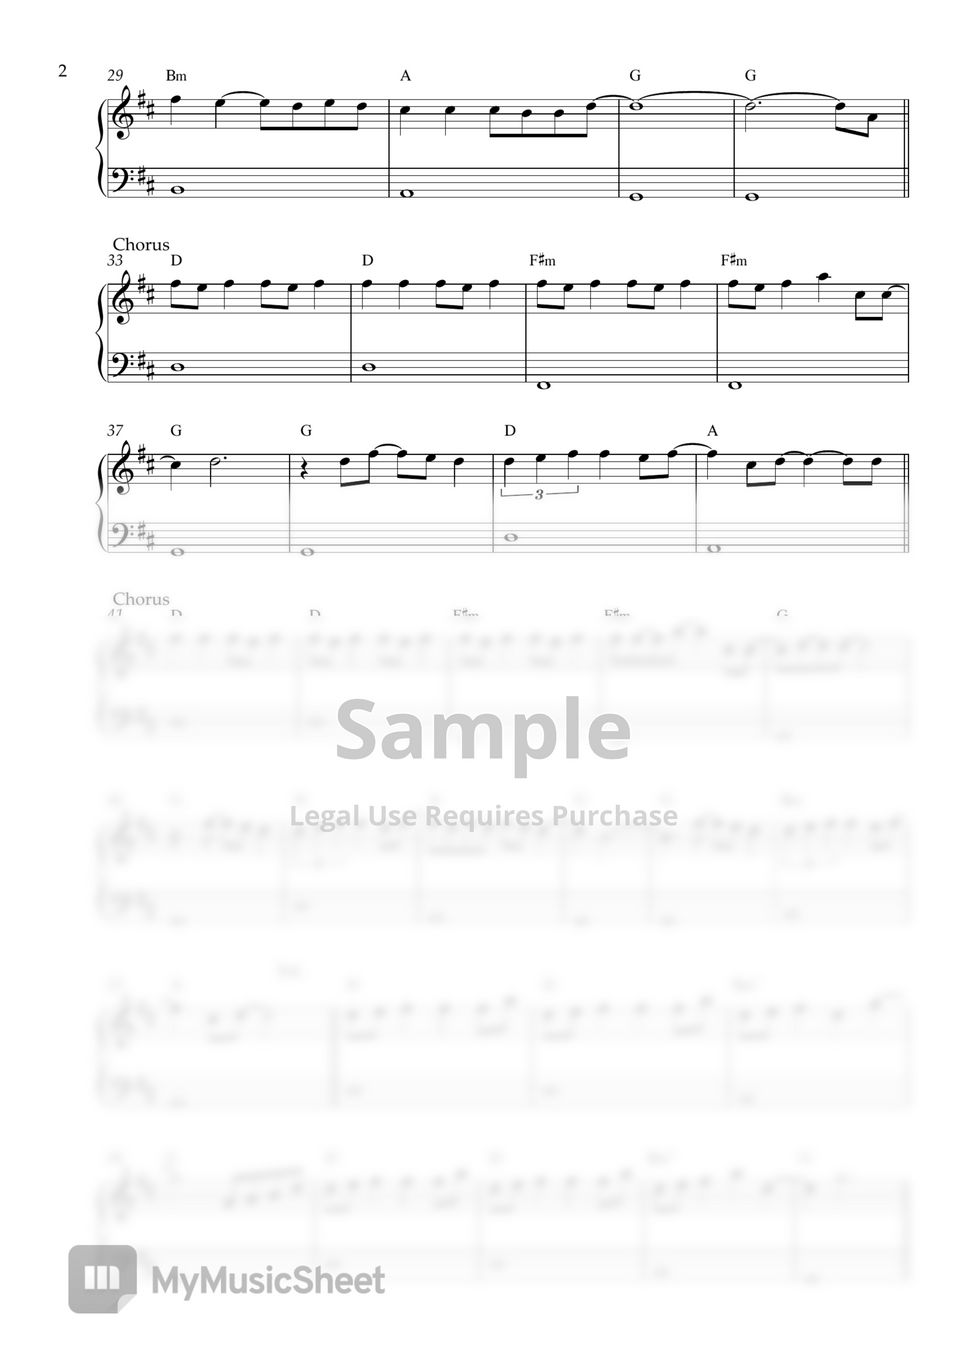 Taylor Swift - Back to December (EASY PIANO SHEET) by Pianella Piano